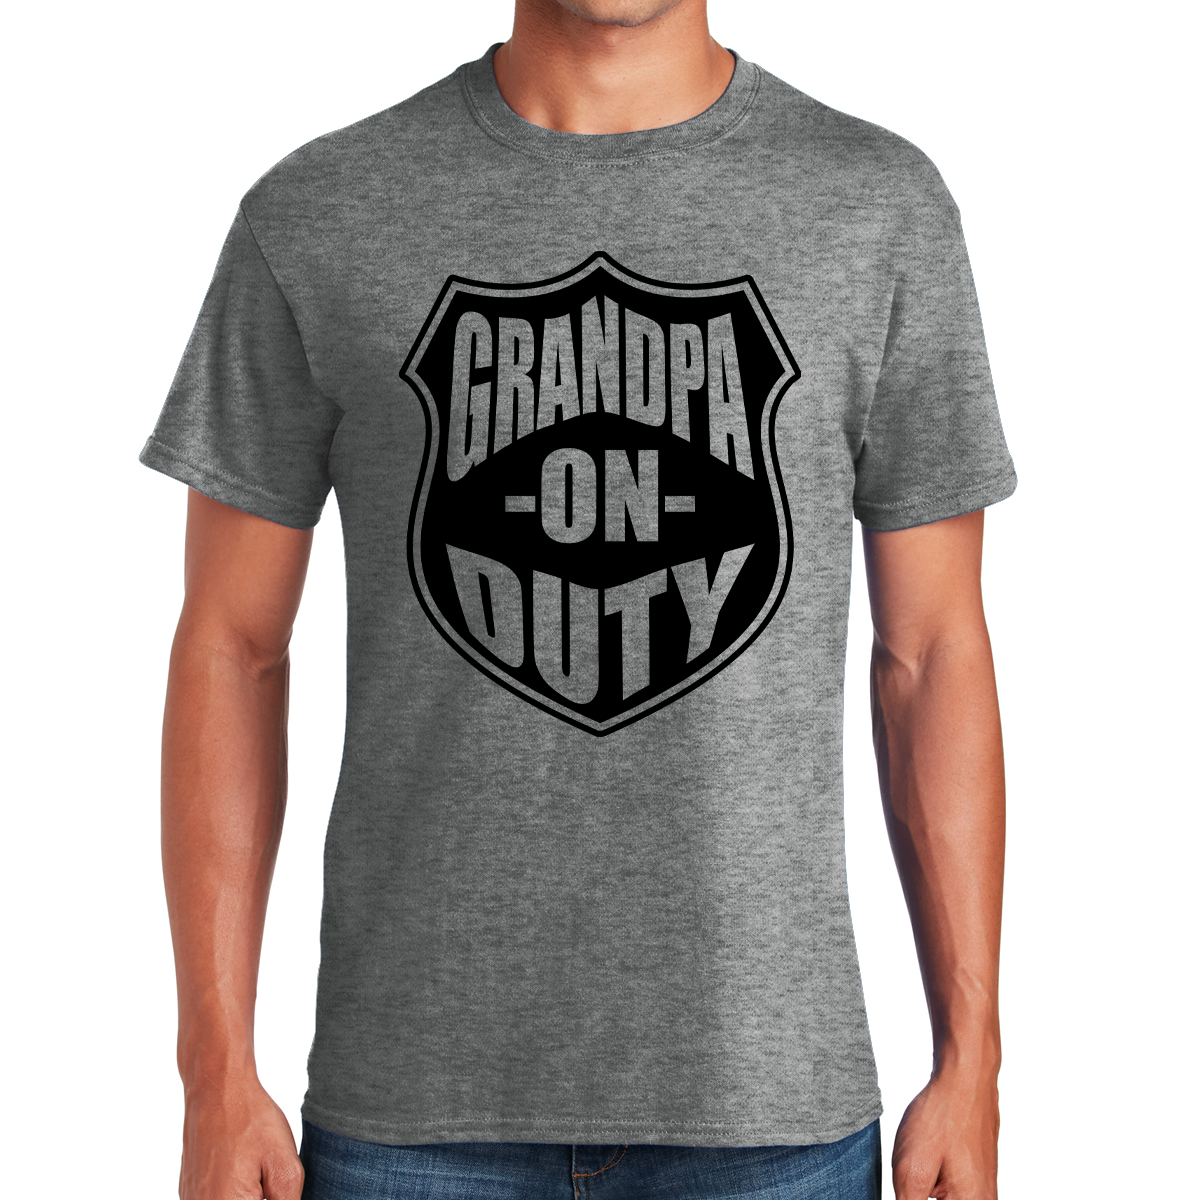 Grandpa On Duty Embracing Grandparenthood With Love And Care Gift For Grandpa T-shirt